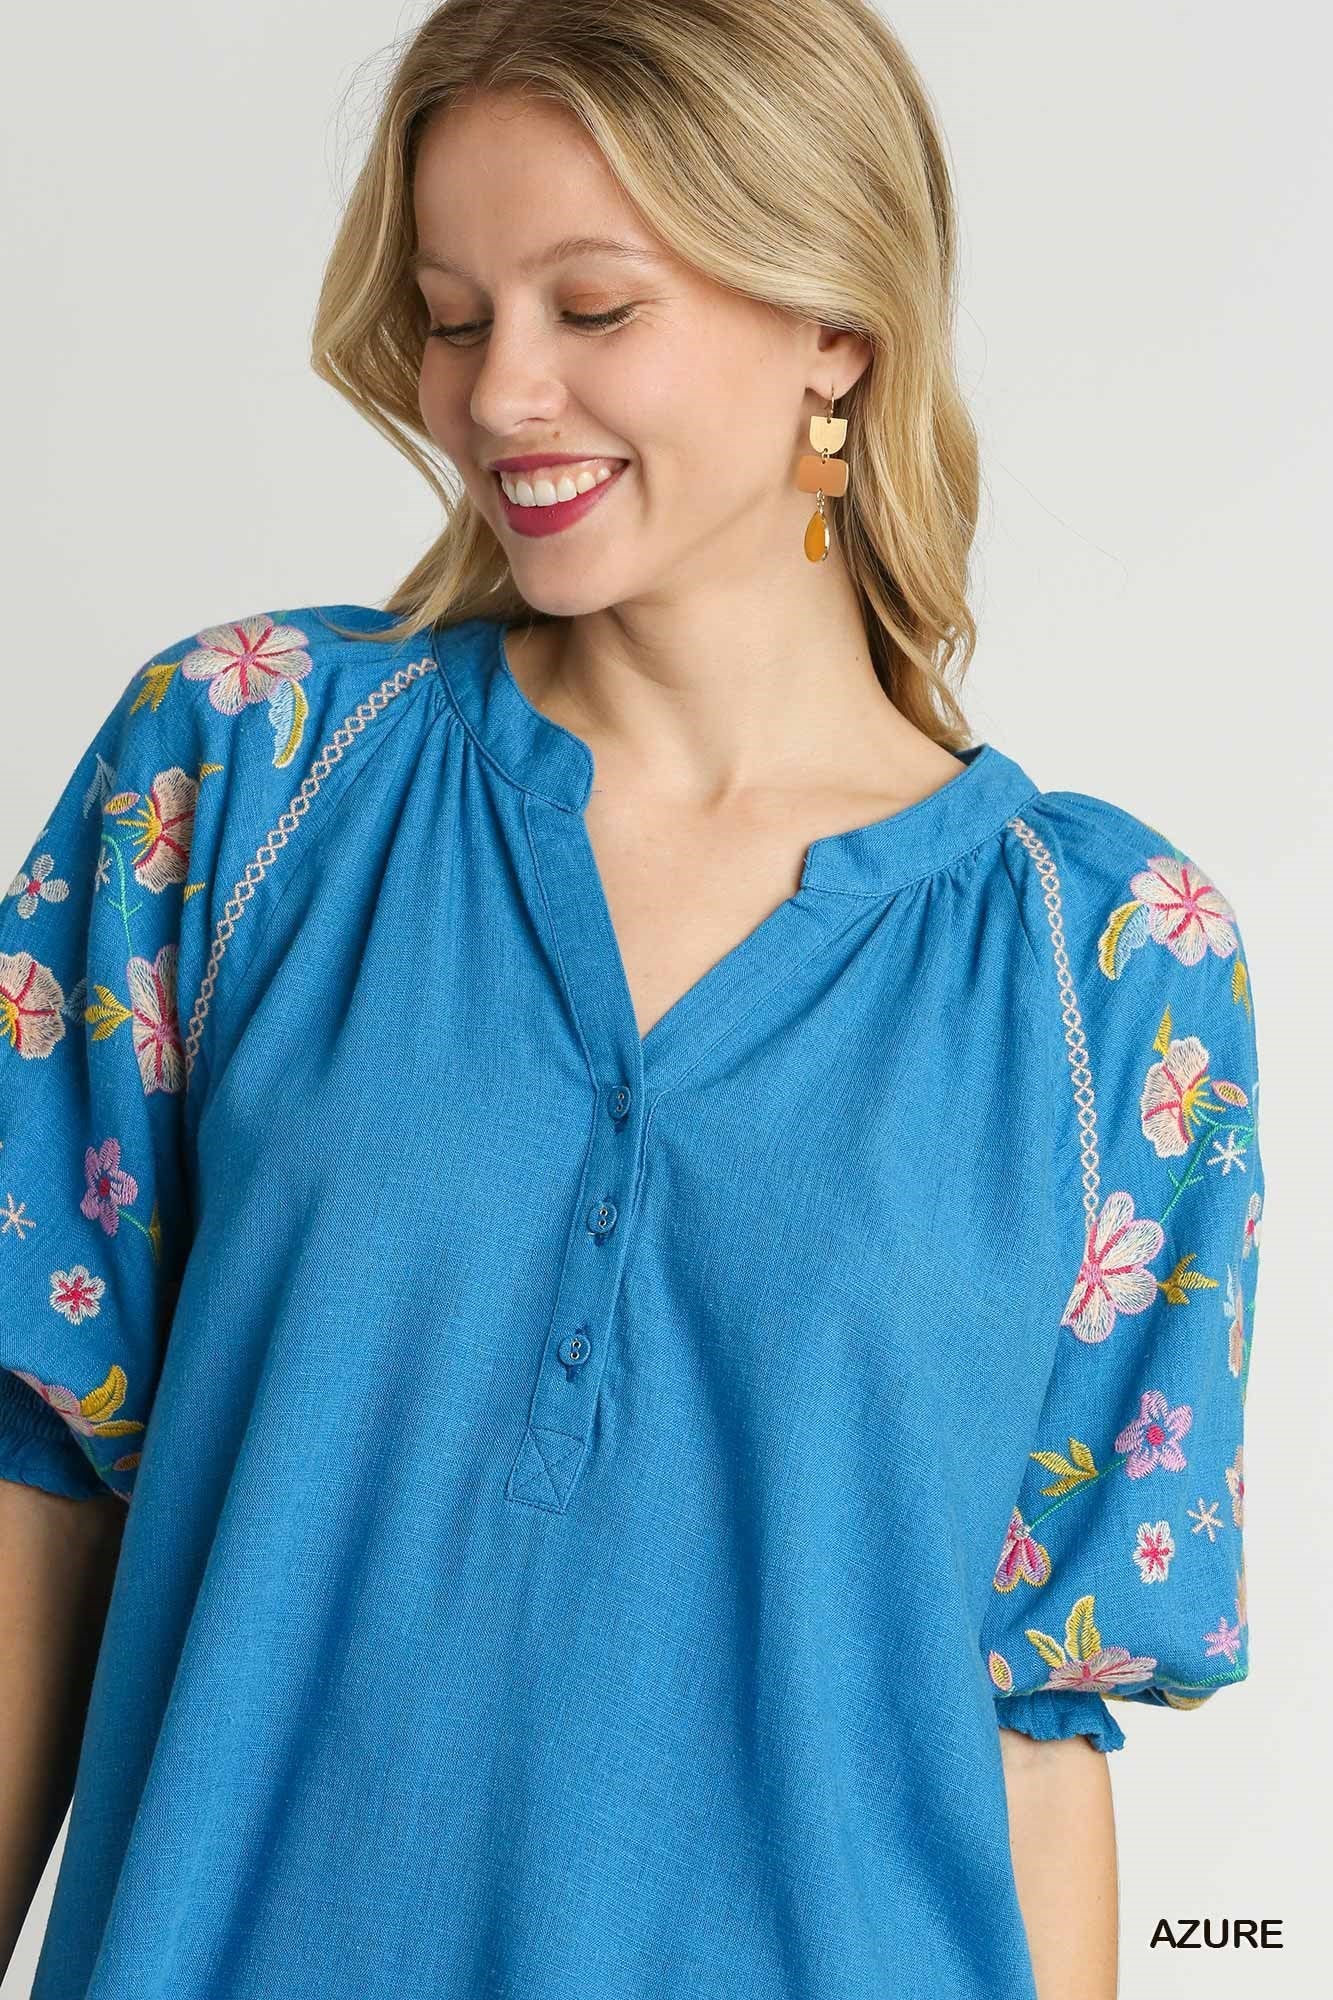 Azure Linen Button Down Top with Embroidery Sleeve